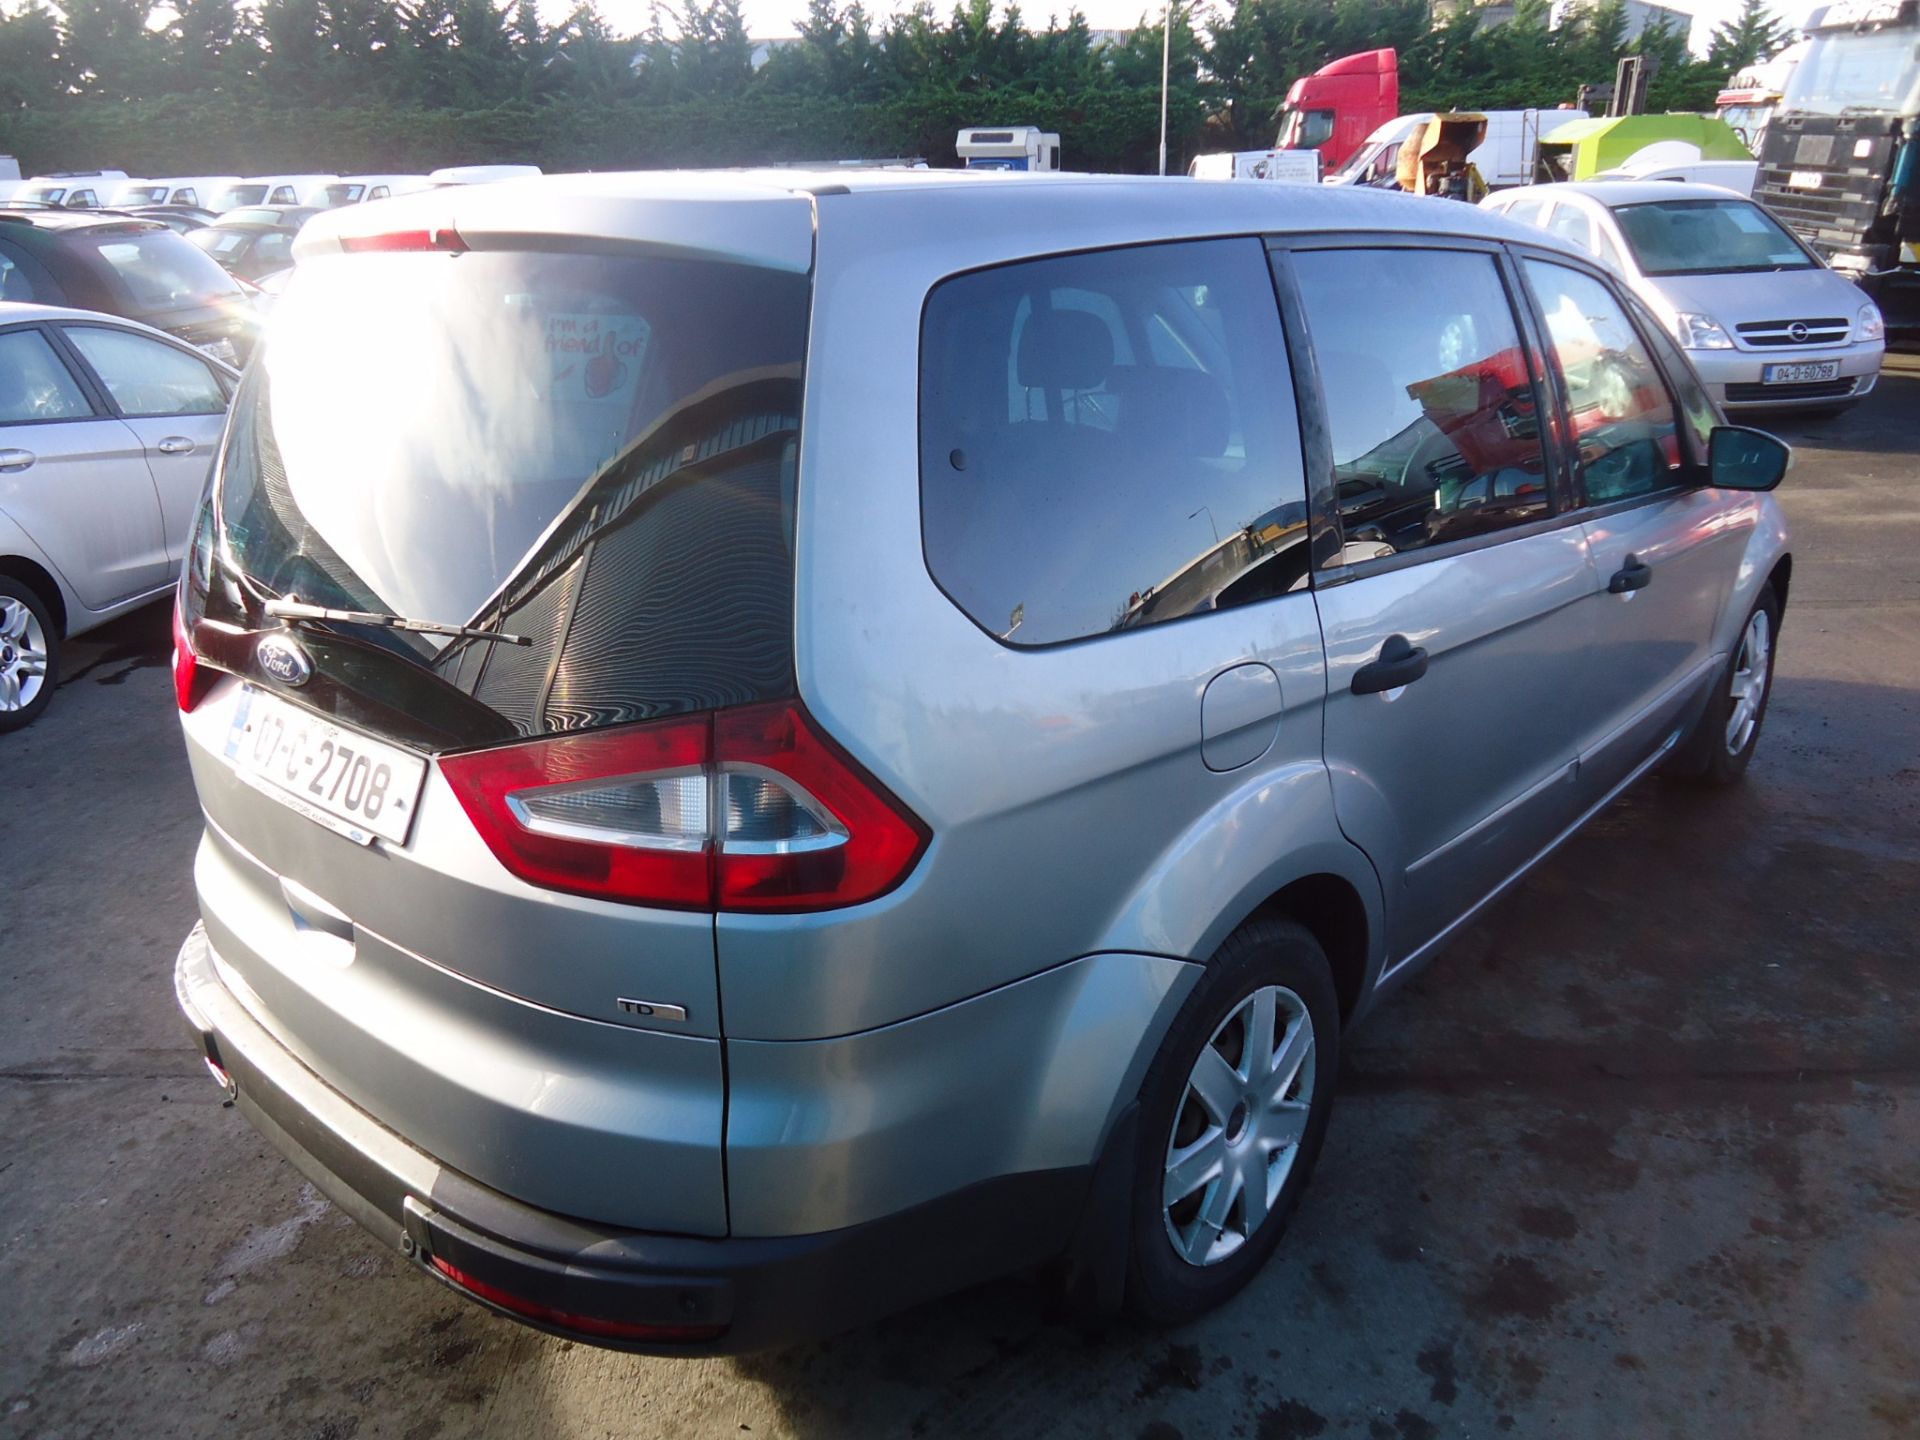 07C2708 Ford Galaxy - Image 3 of 6